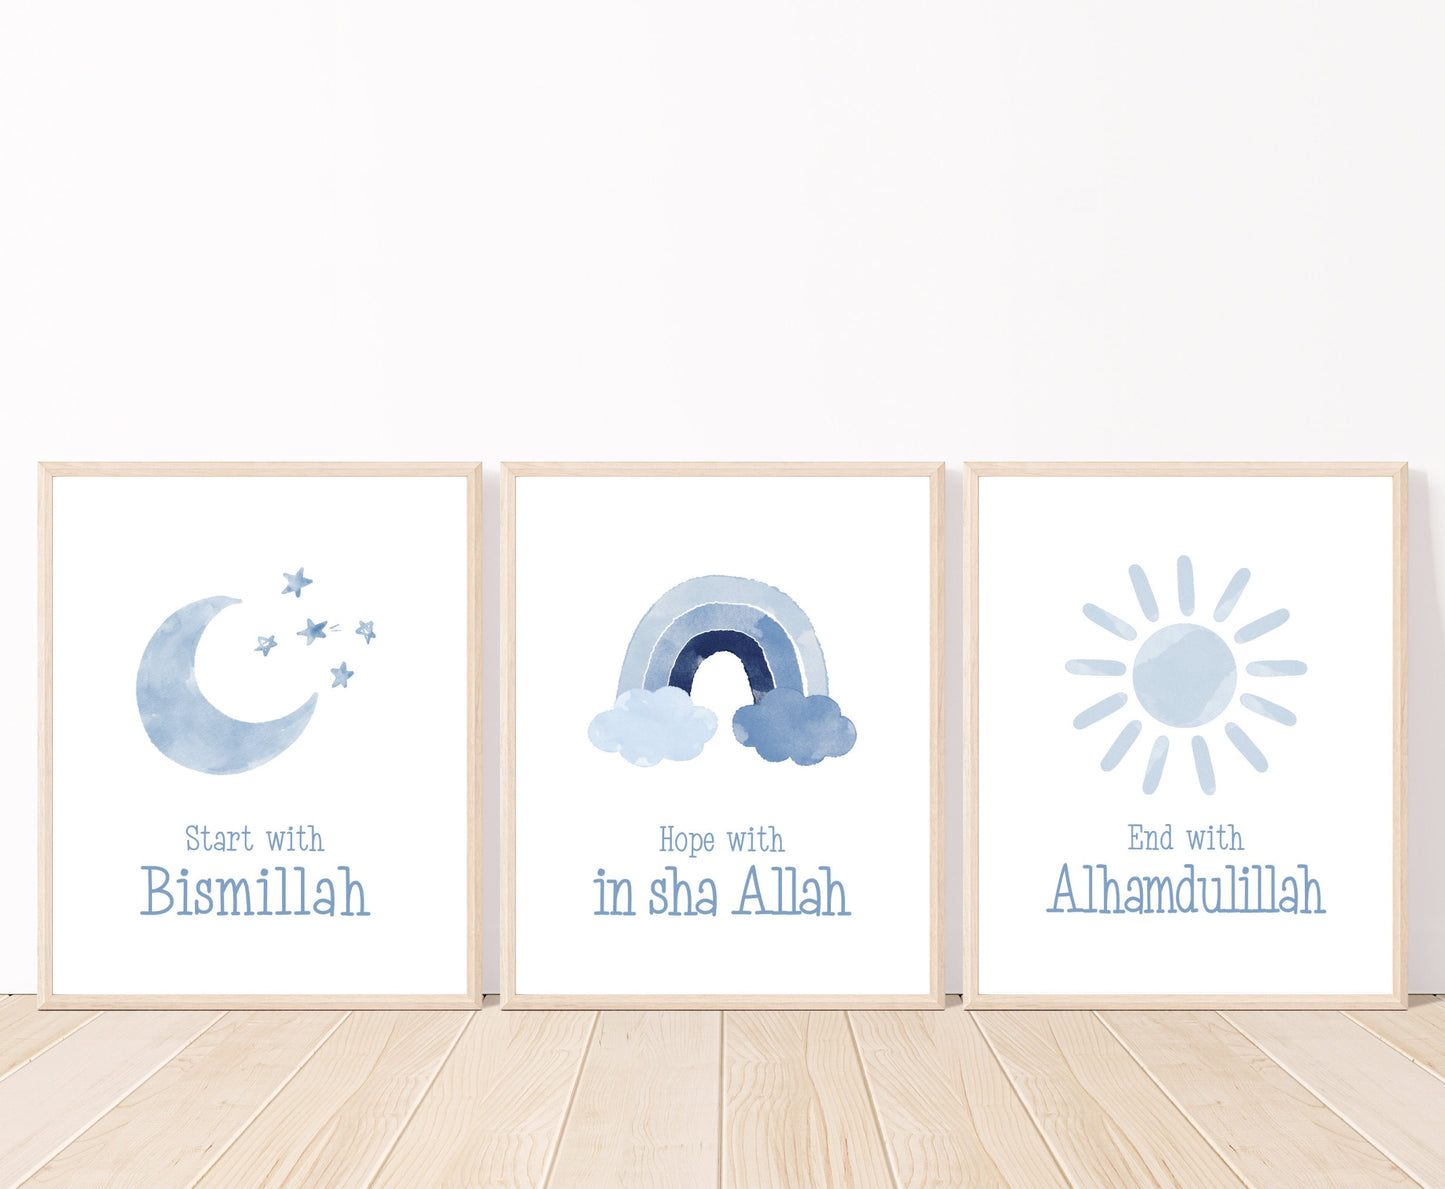 An image showing three graphics. The first one shows a blue crescent and tiny blue stars beside it with “Start with Bismillah” written below. The middle graphic shows a rainbow in different shades of blue coming from two blue clouds, with “Hope with In Sha Allah” written in blue right below it. The last image is of a baby blue sun with “End with Alhamdulillah” written in blue right below it.